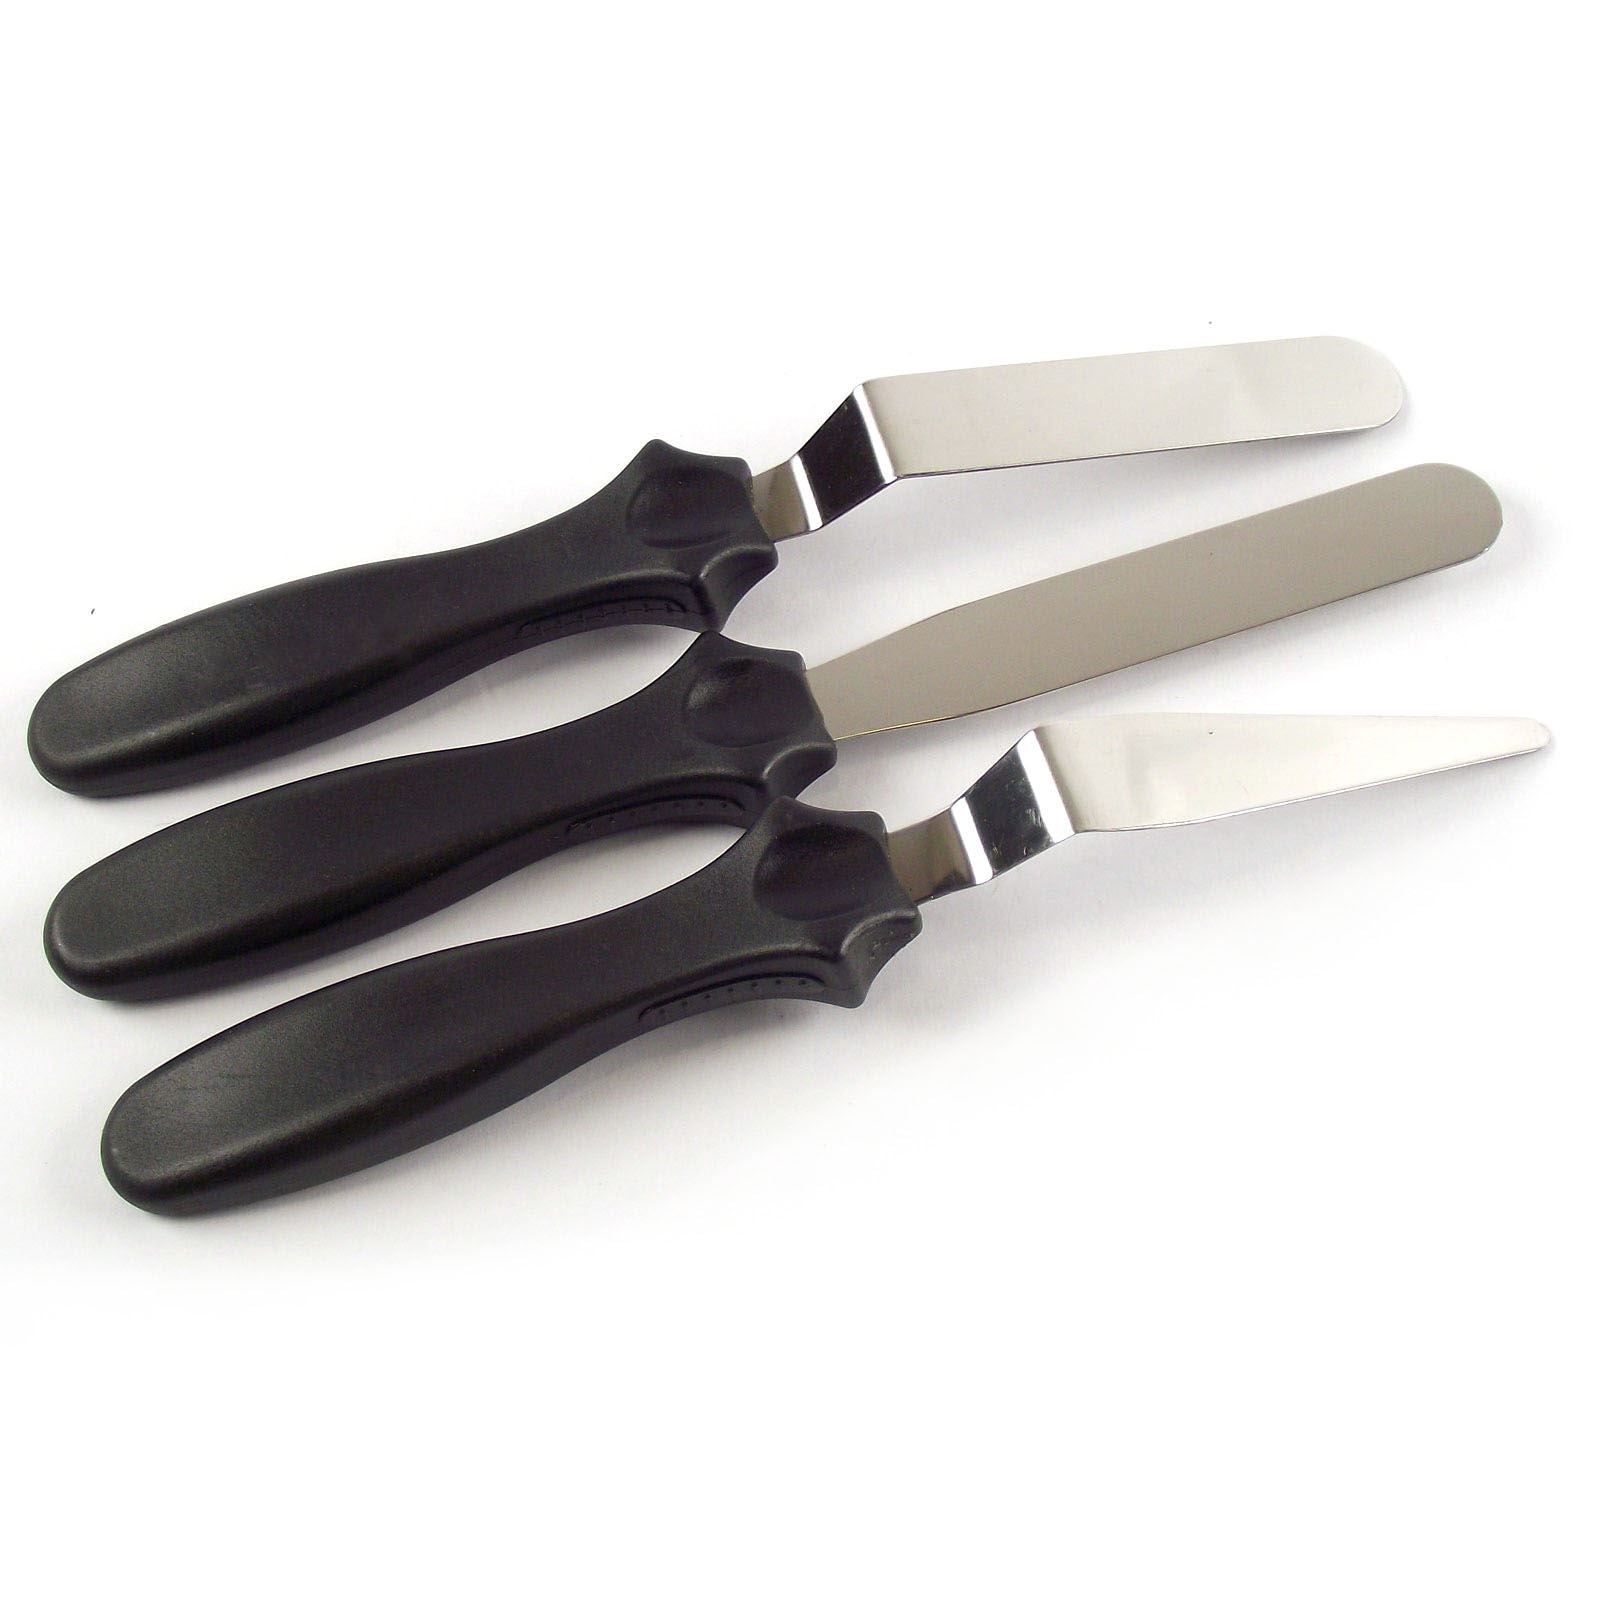 Set of 3 Smoothing Palette Knives